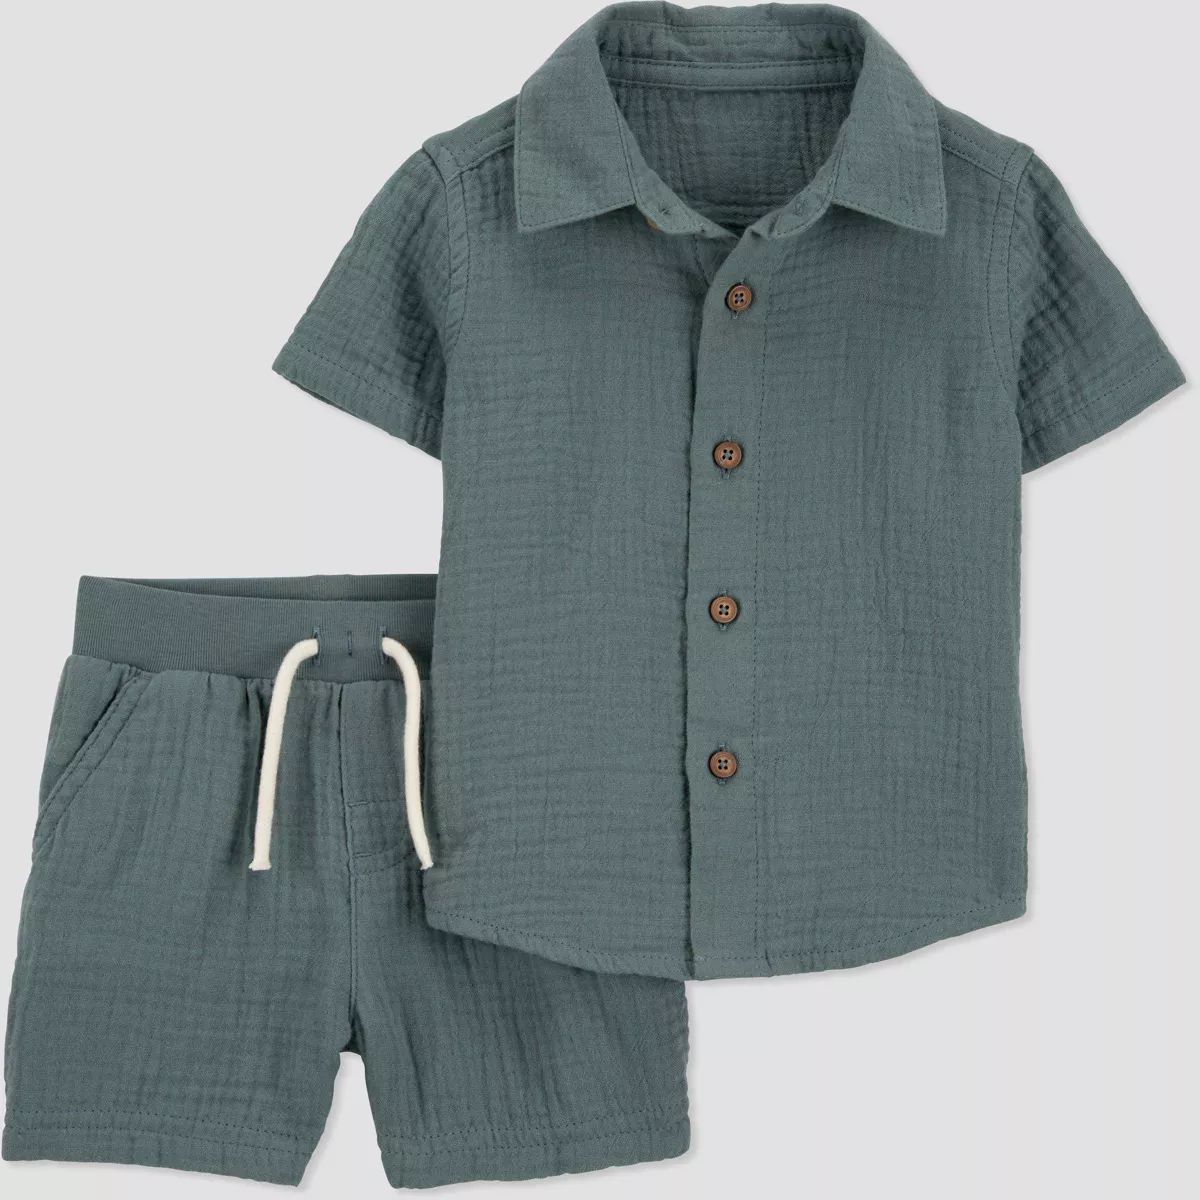 Carter's Just One You® Baby Boys' Striped Top & Bottom Set - Dark Green 12M | Target